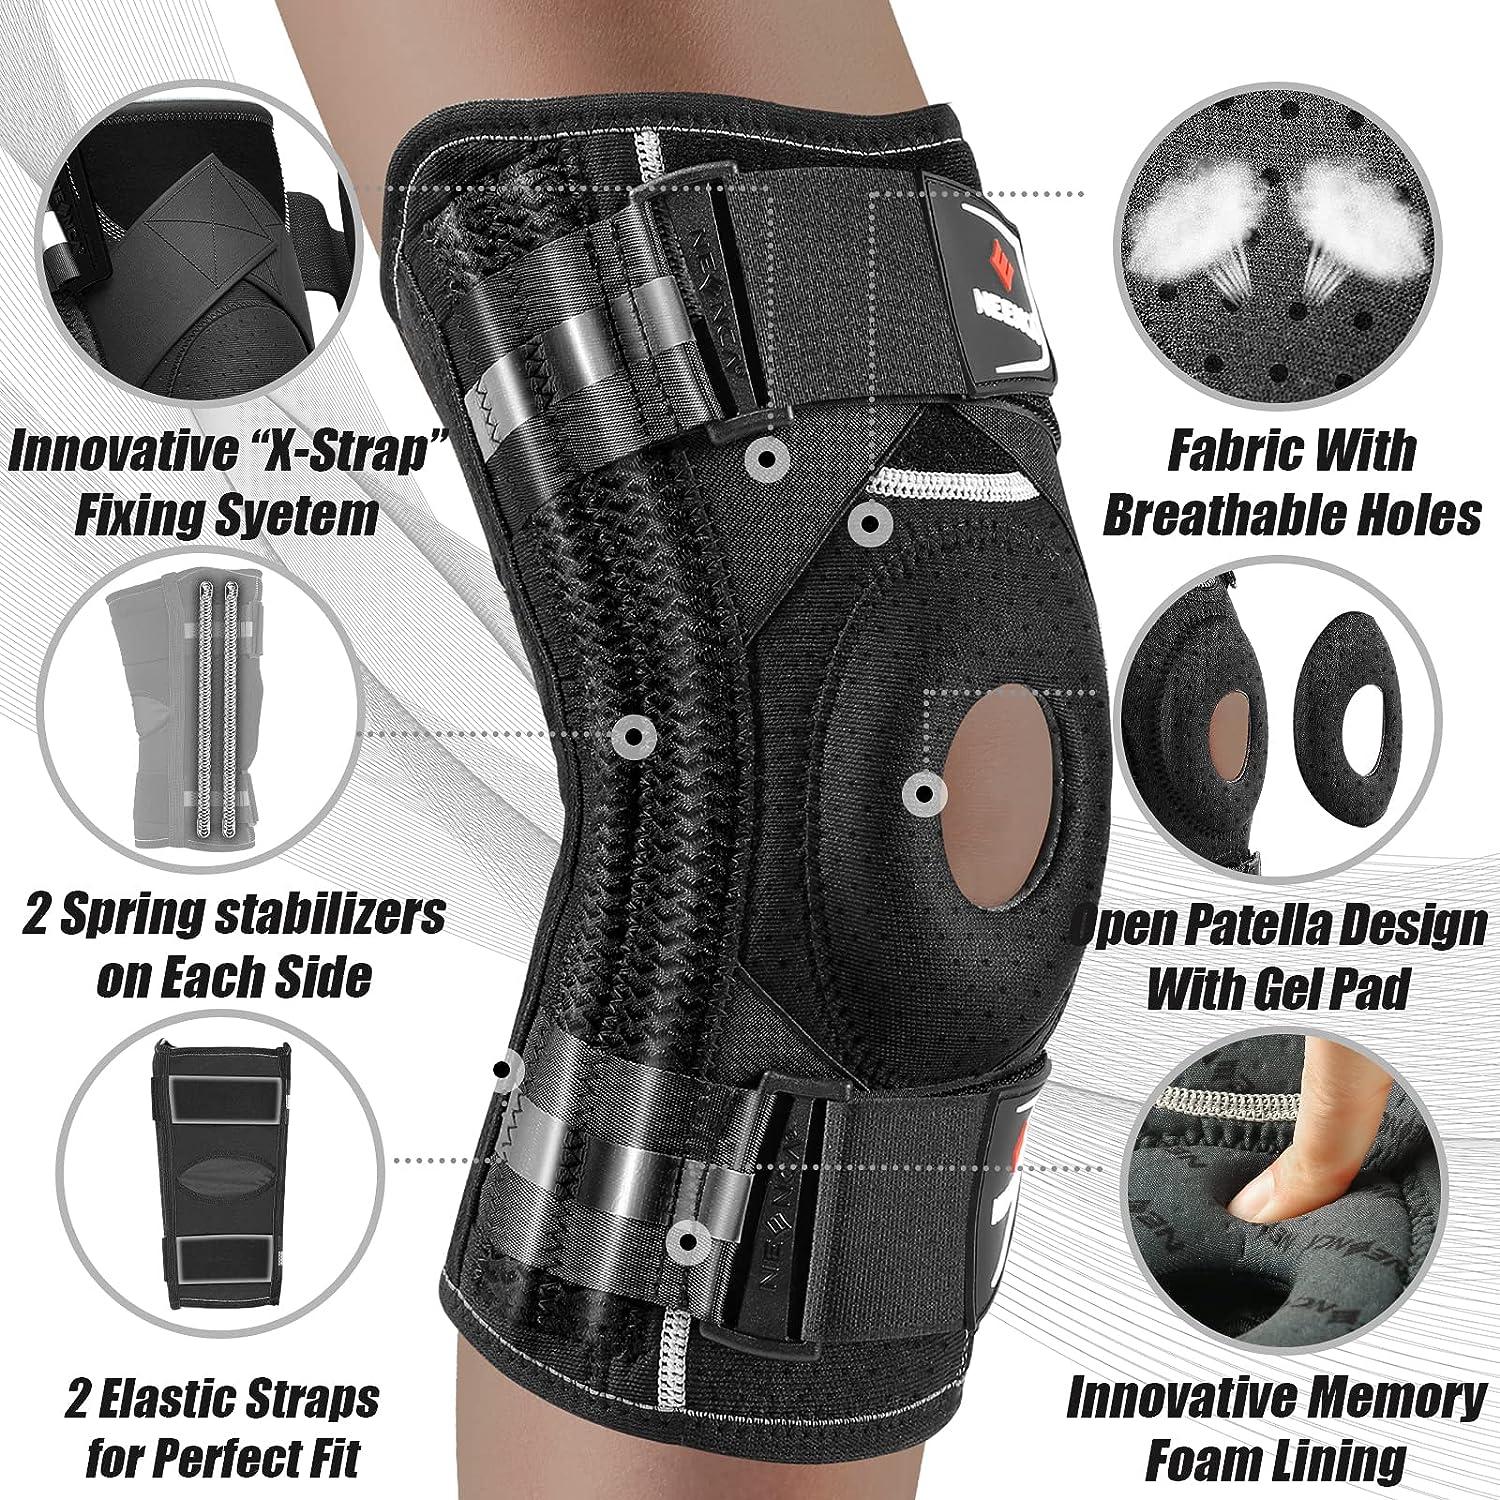 NEENCA Professional Knee Brace for Knee Pain Medical Knee Support with  Patented X-Strap Fixing System. Best for Arthritis Meniscus Tear Injury  Recovery Knee Pain Relief ACL Sports. Large Black